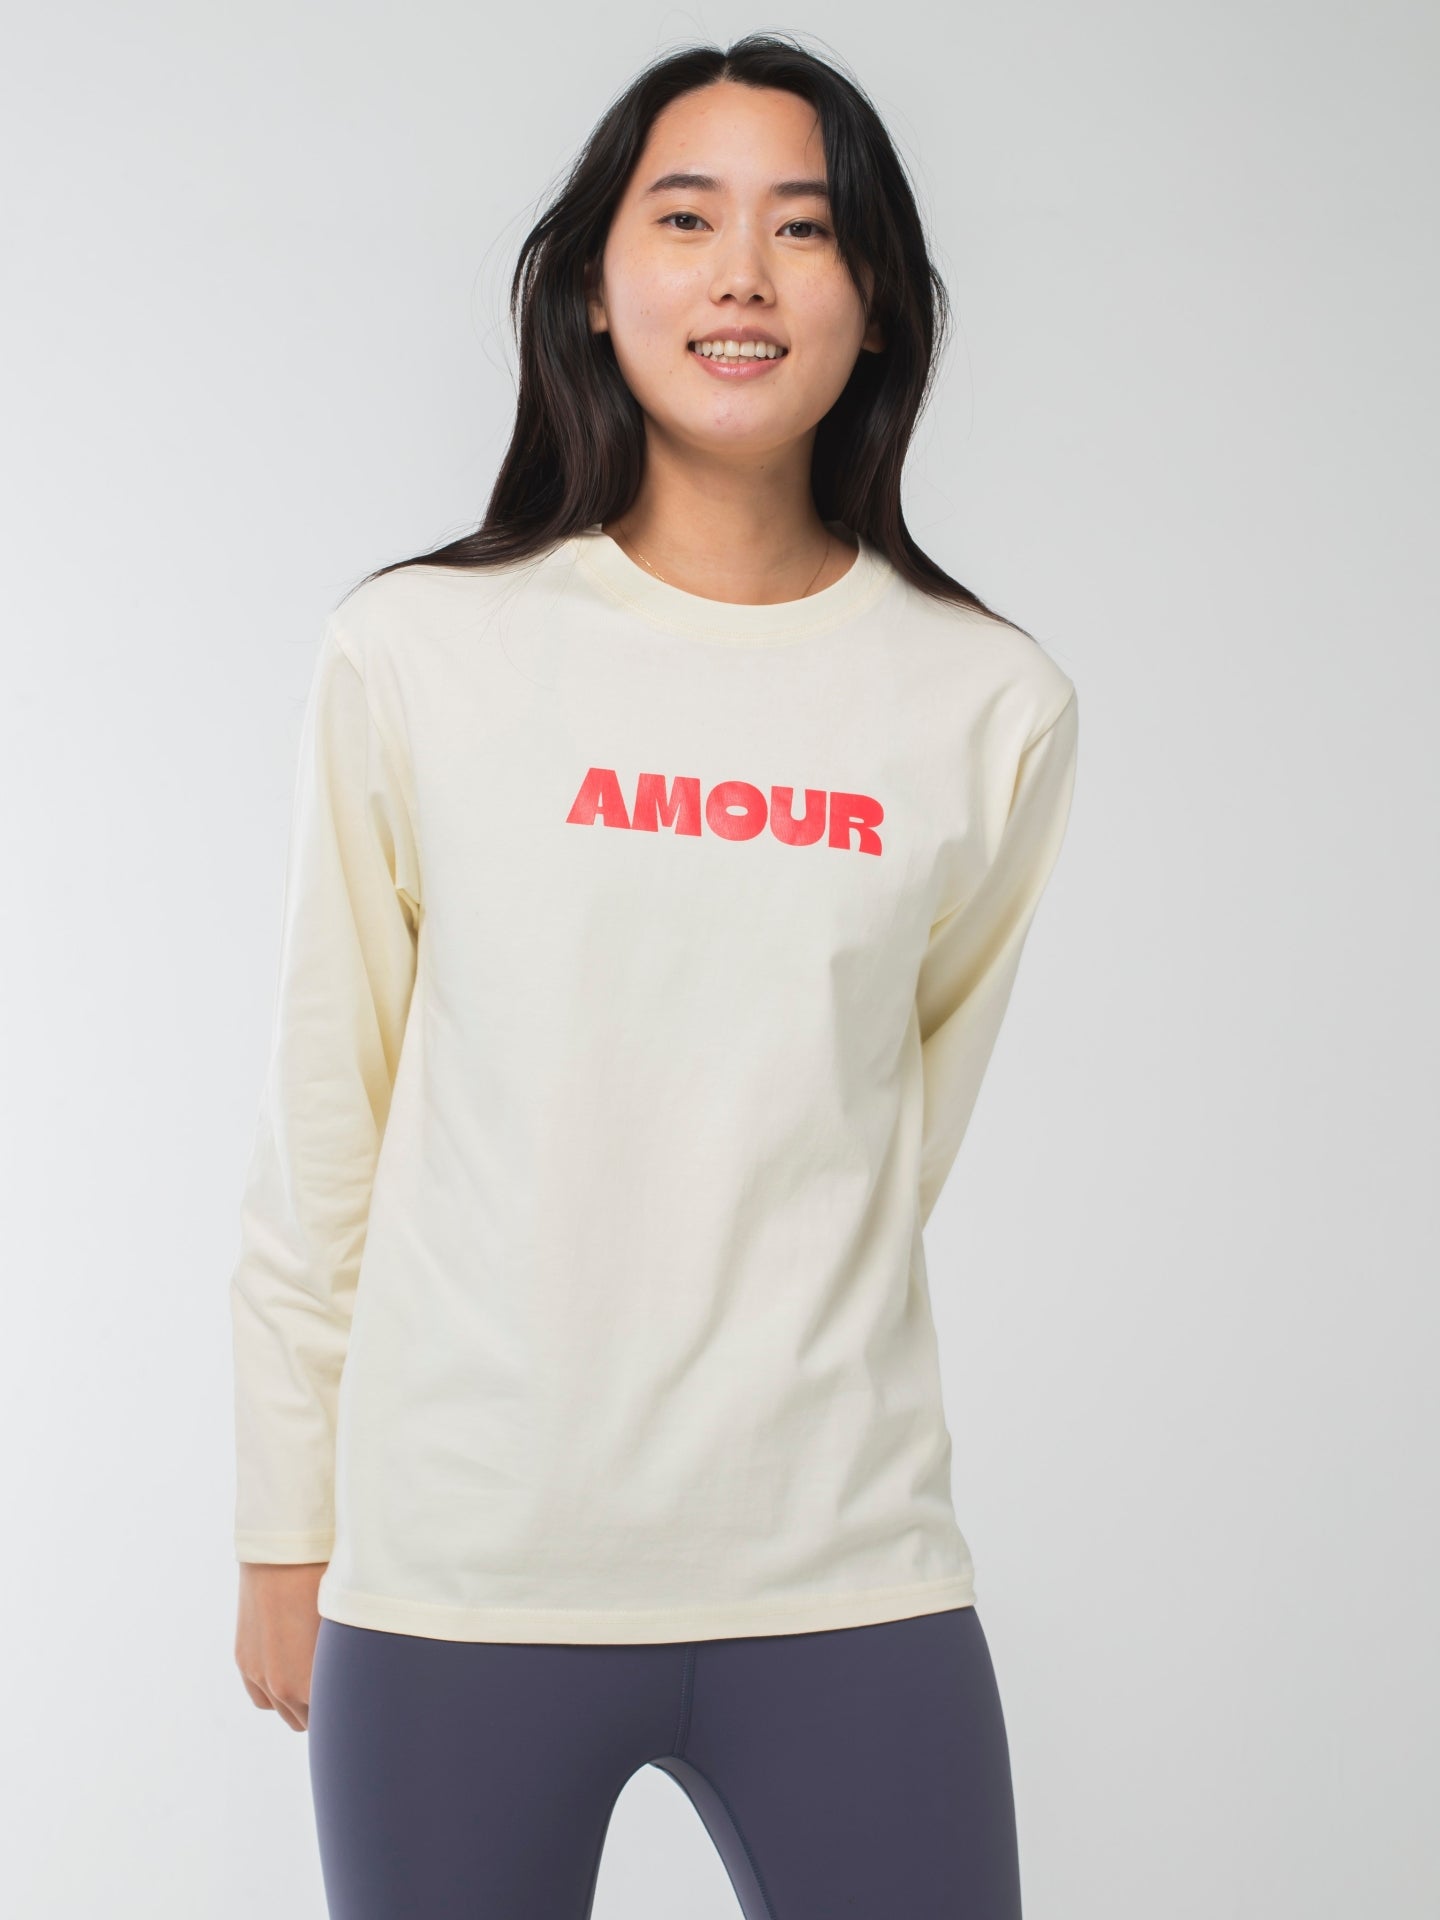 Amour Long-Sleeve Tee Apricot